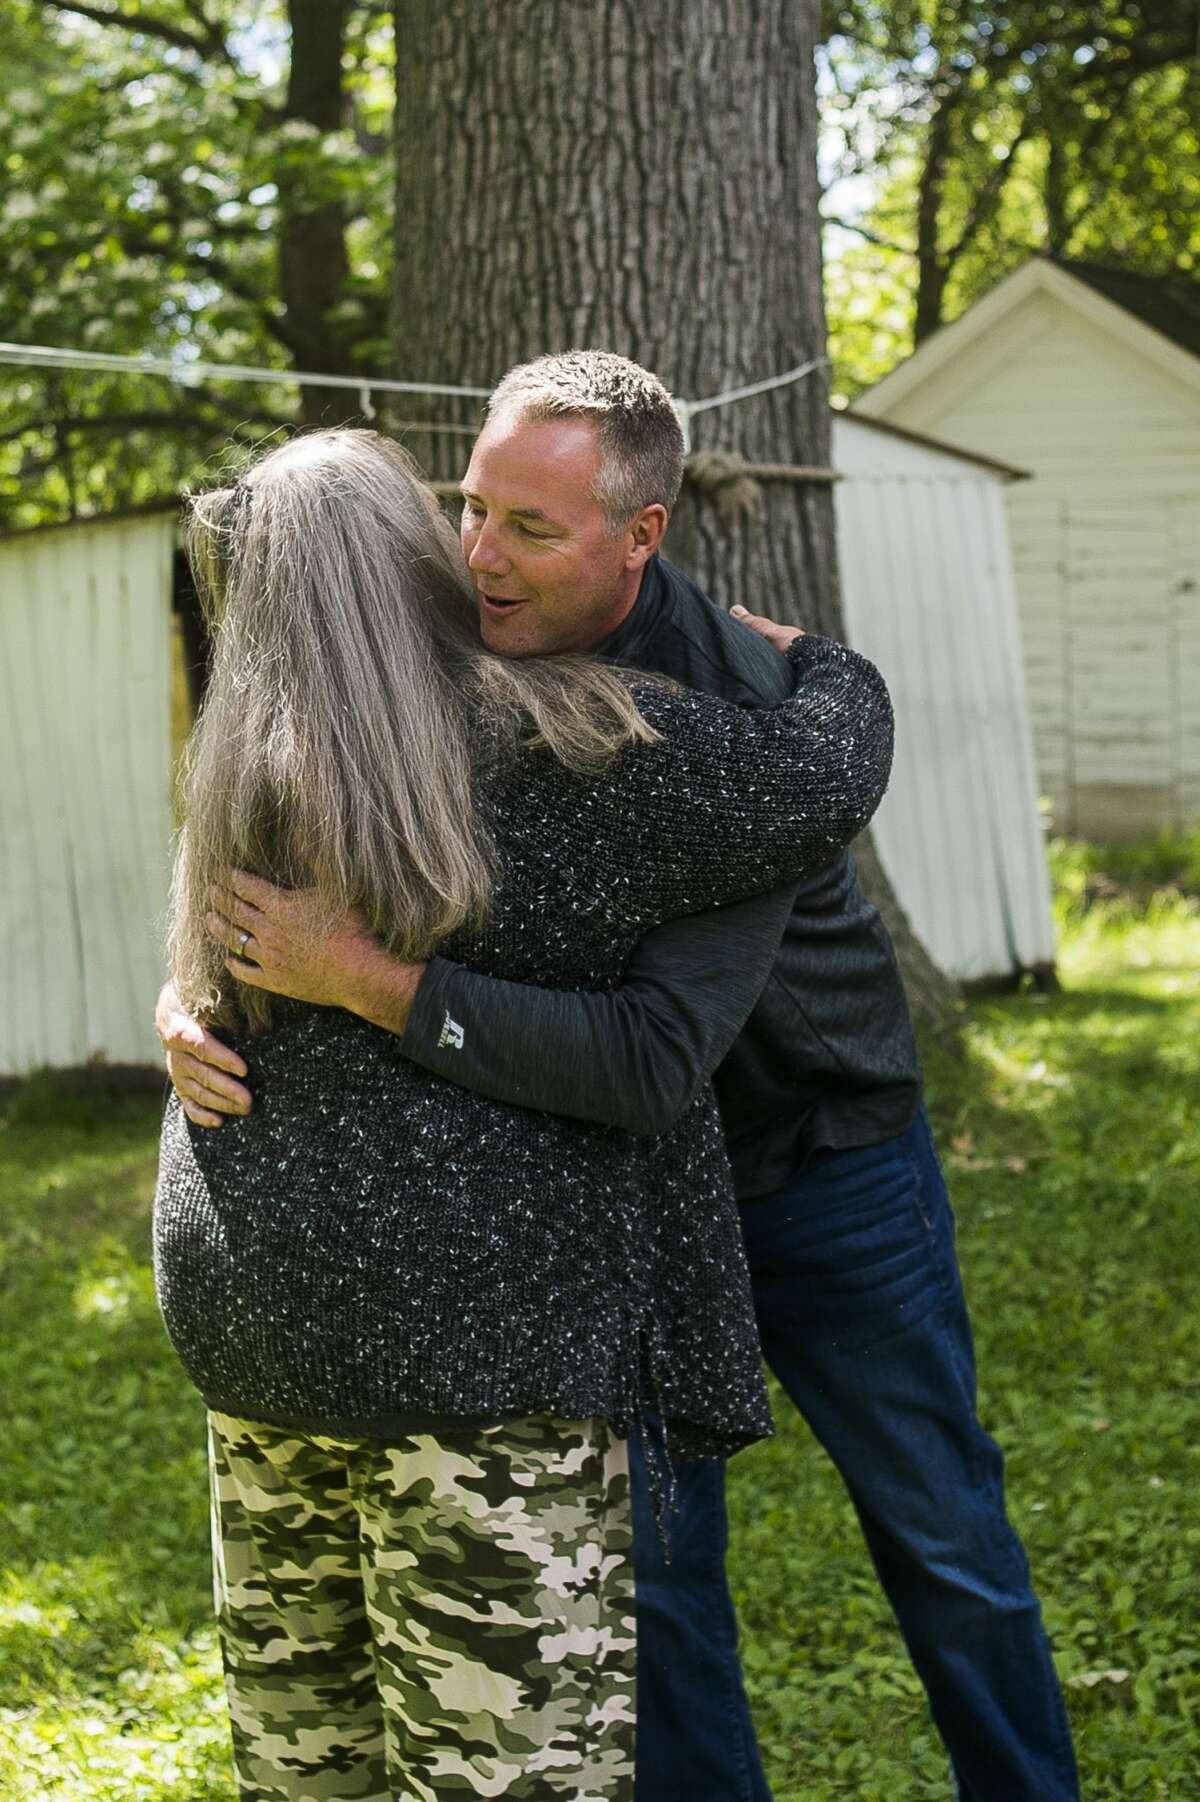 Penny Tyler of Sanford, left, hugs David Dennis, owner of Great Lakes Homes in Freeland, right, after Dennis told her Wednesday, June 24, 2020 that the company will build Tyler a new home at no cost to her on the same site of her family home, which was devastated by the flood. The Islamic Center of Midland and Midland Area Interfaith Friends will furnish the home. (Katy Kildee/kkildee@mdn.net)